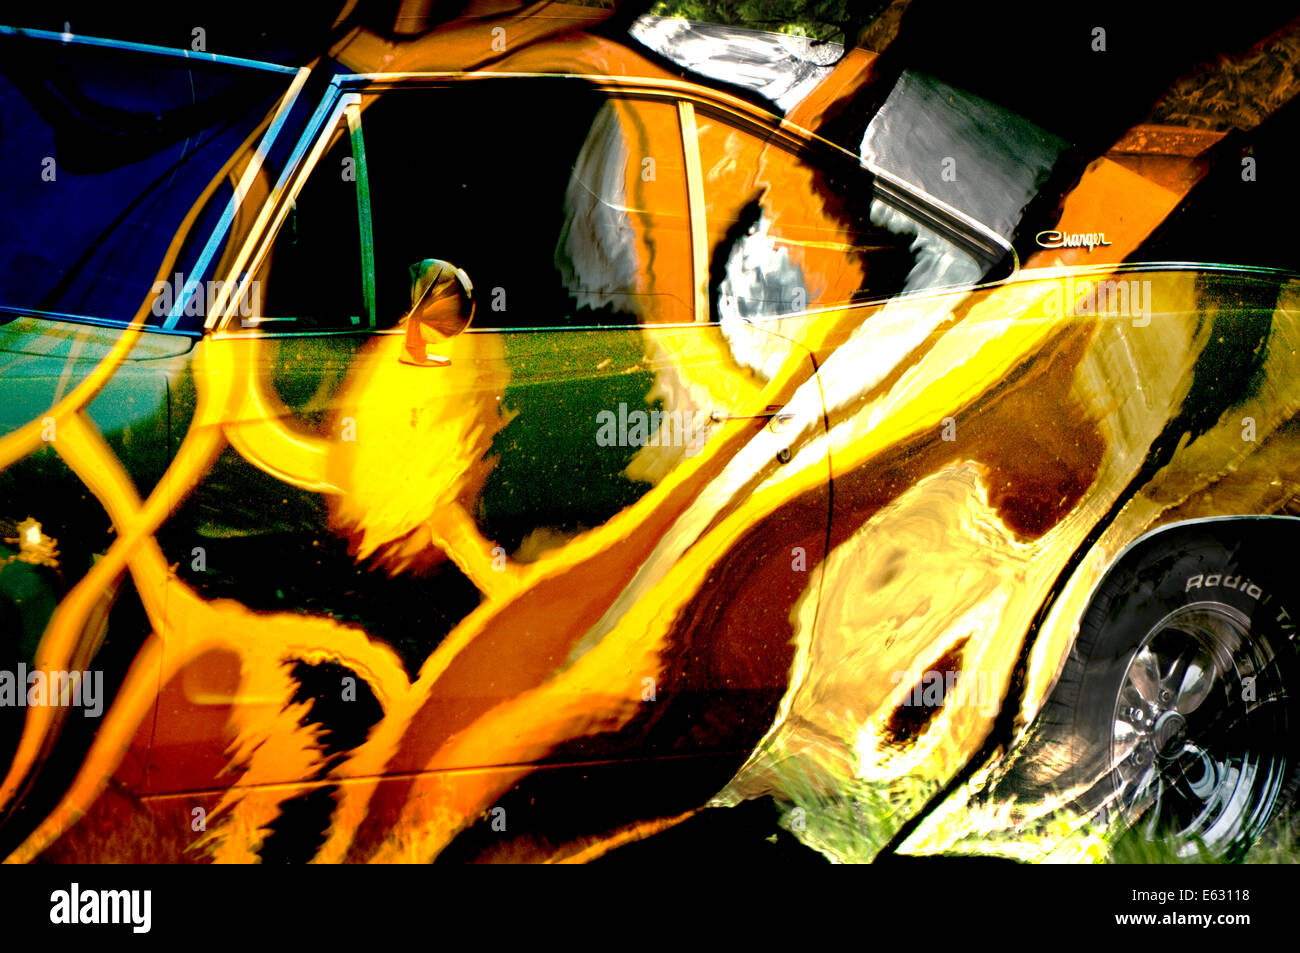 A sports car overlaid with psychedelic paint effect Stock Photo